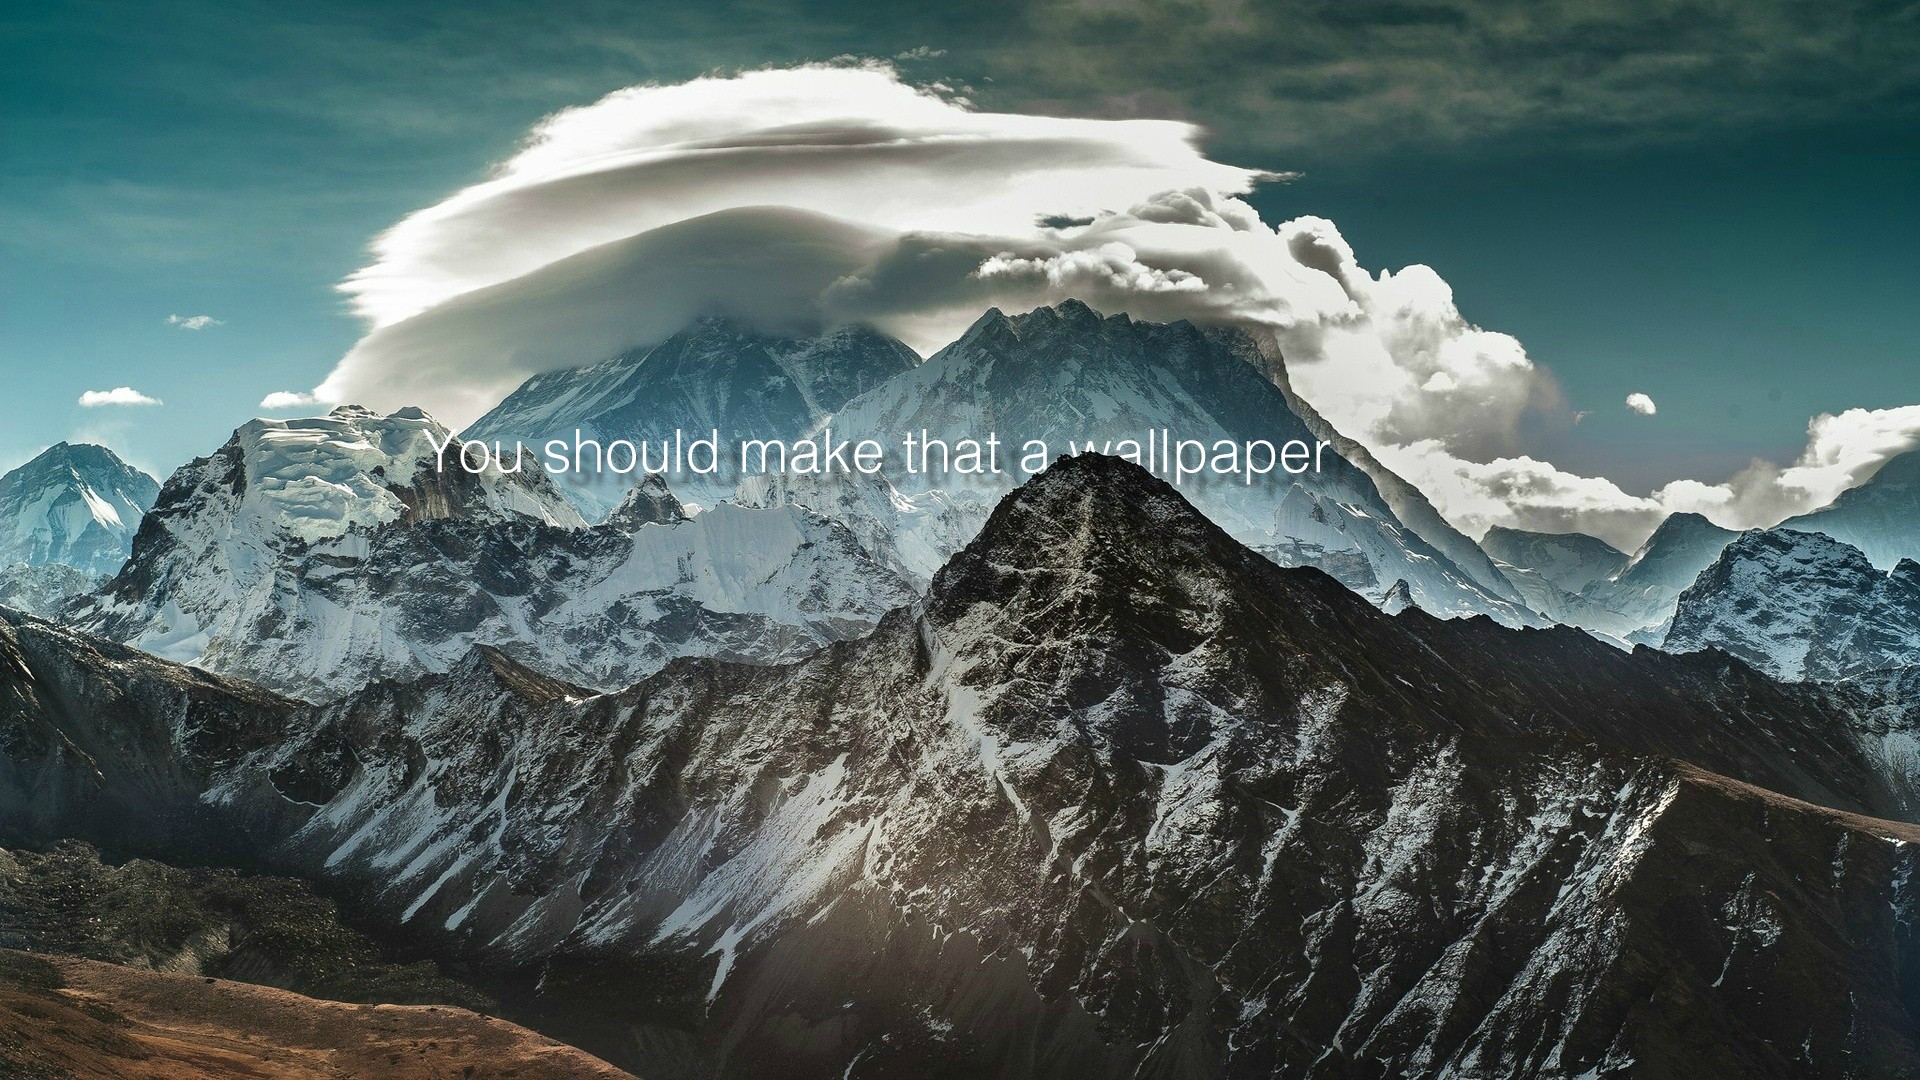 General 1920x1080 typography mountains landscape sky clouds nature Himalayas Mount Everest